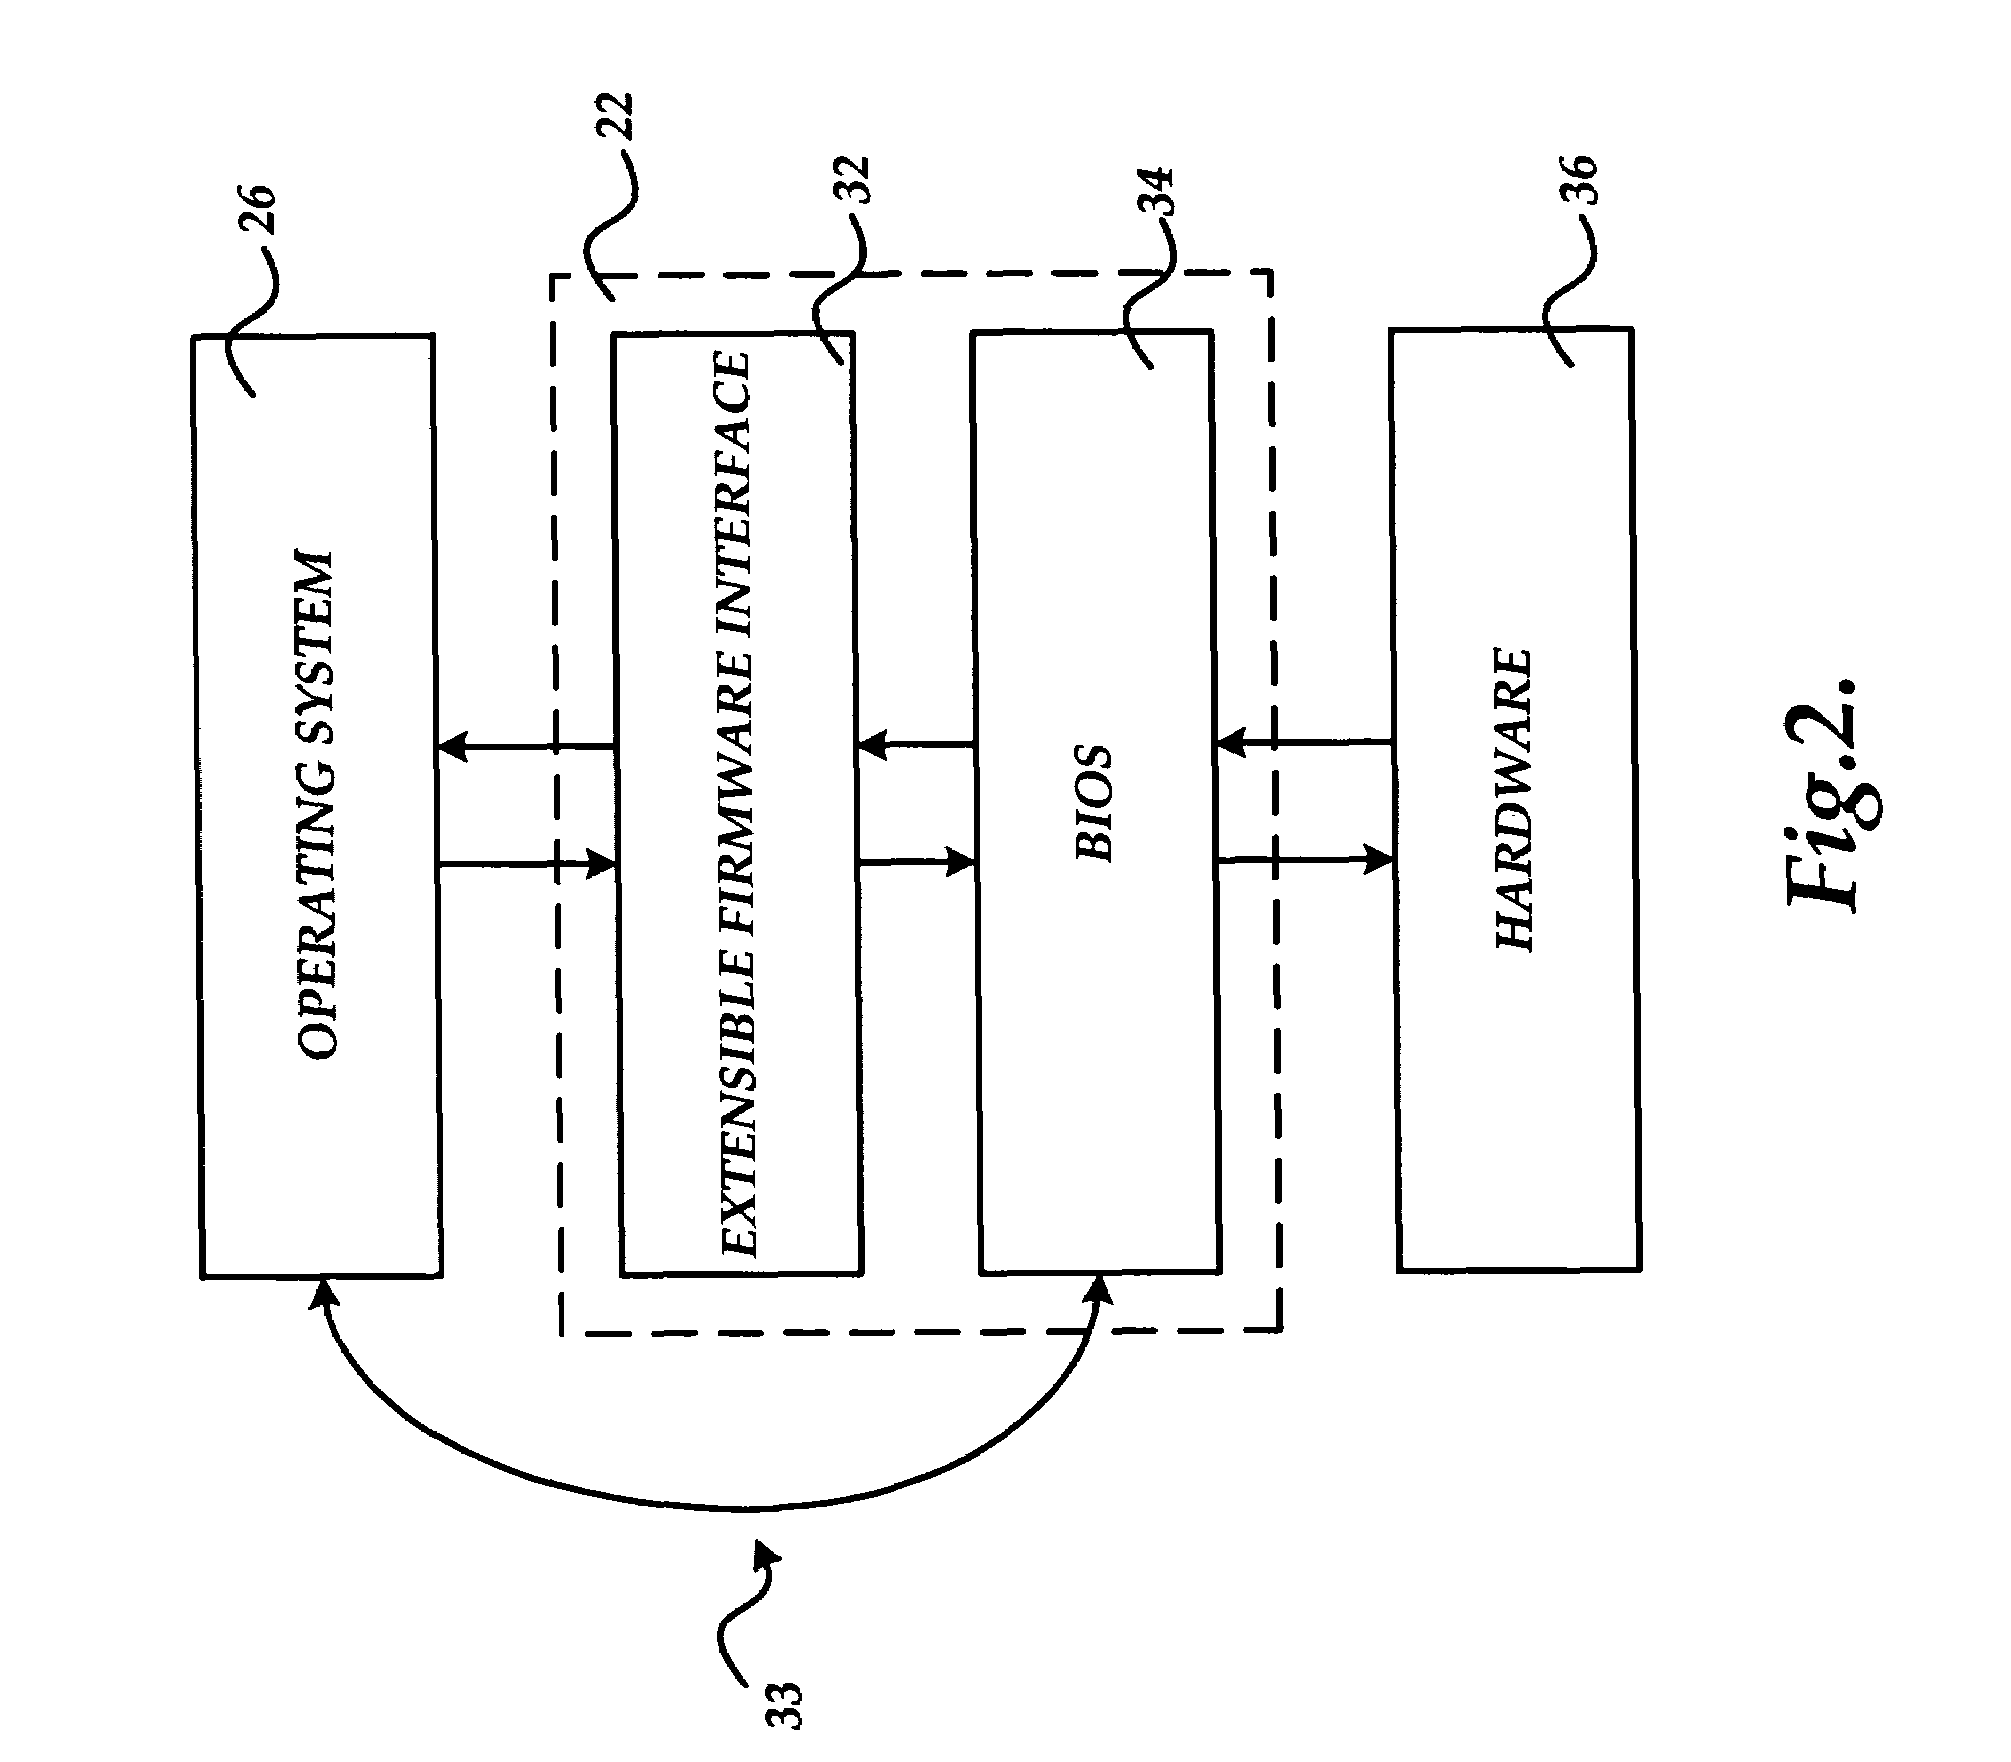 Method, system, and apparatus for efficient evaluation of boolean expressions